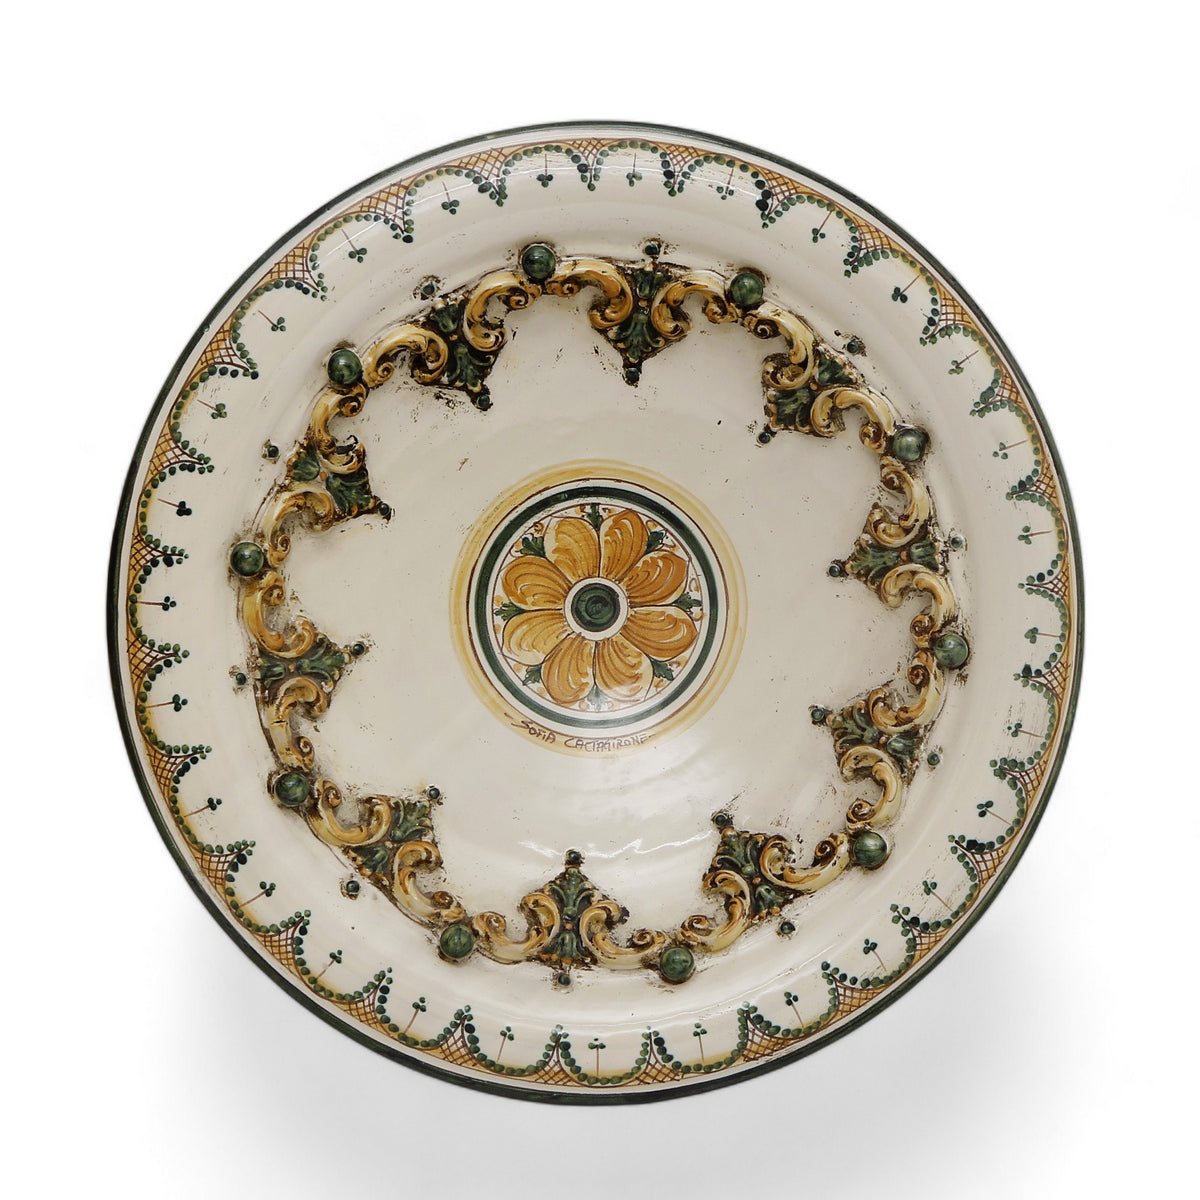 SOFIA TRICOLORE: Centerpiece Plate with Bass Relief Decoration